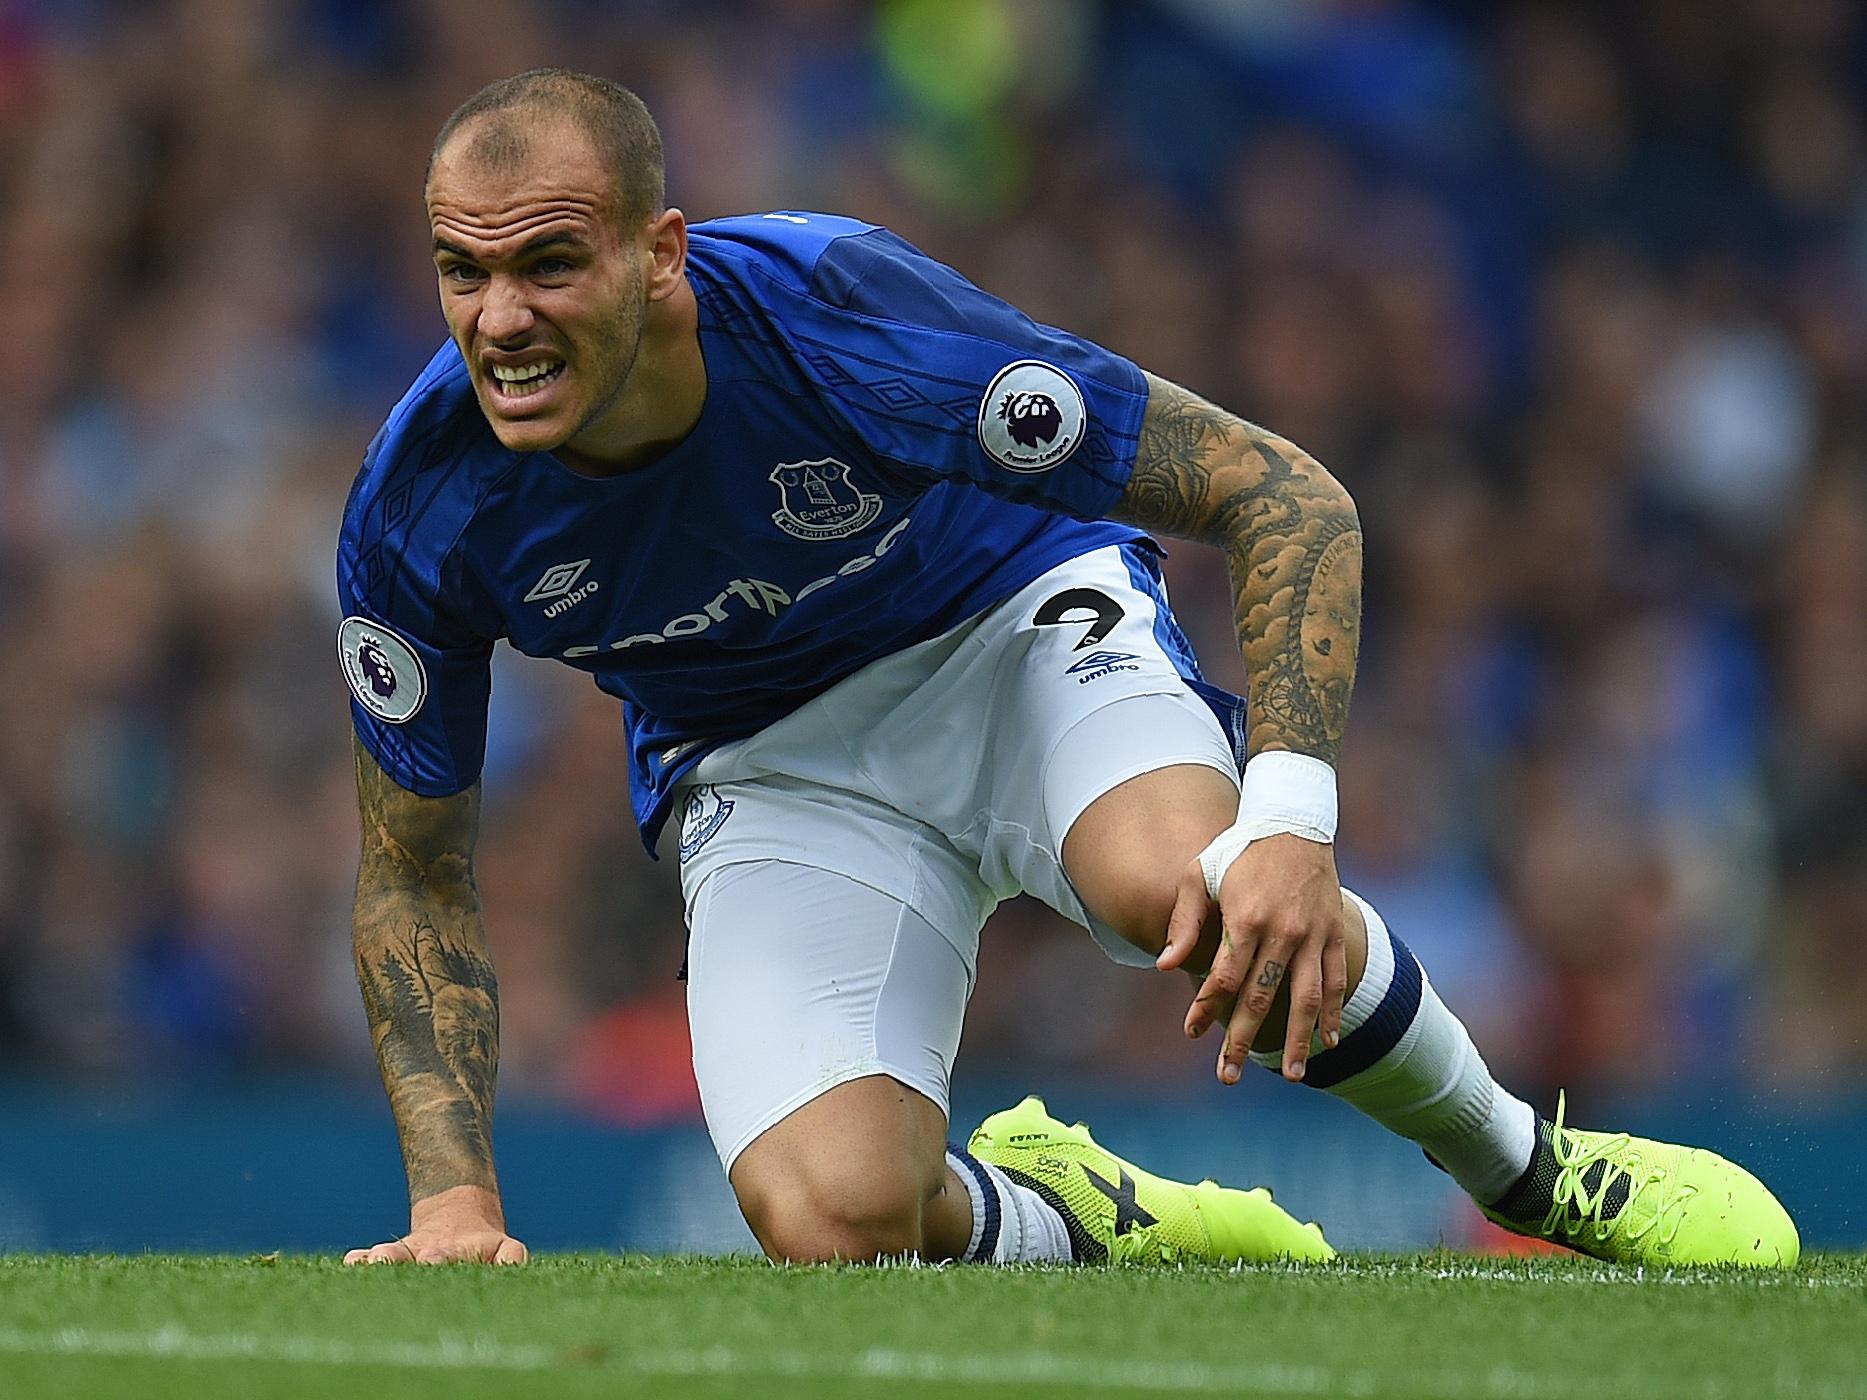 Sandro Ramirez is yet to get off the mark for Everton